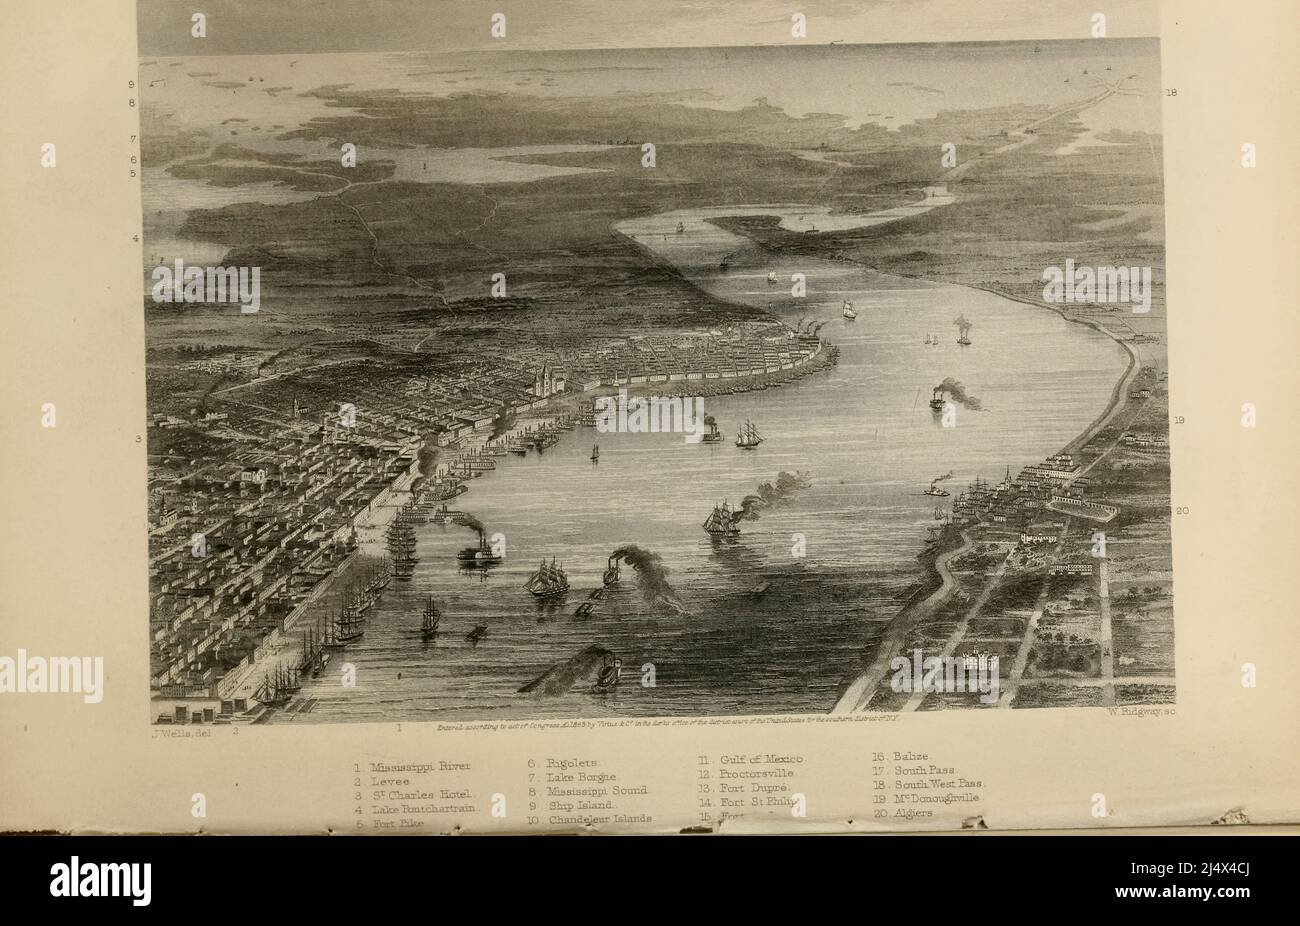 NEW ORLEANS, LA., AND ITS VICINITY from the book The great Civil War : a history of the late rebellion : with biographical sketches of leading statesmen and distinguished naval and military commanders, etc. by Robert Tomes, 1817-1882 Publisher New York : Virtue and Yorston 1865-1867 Stock Photo